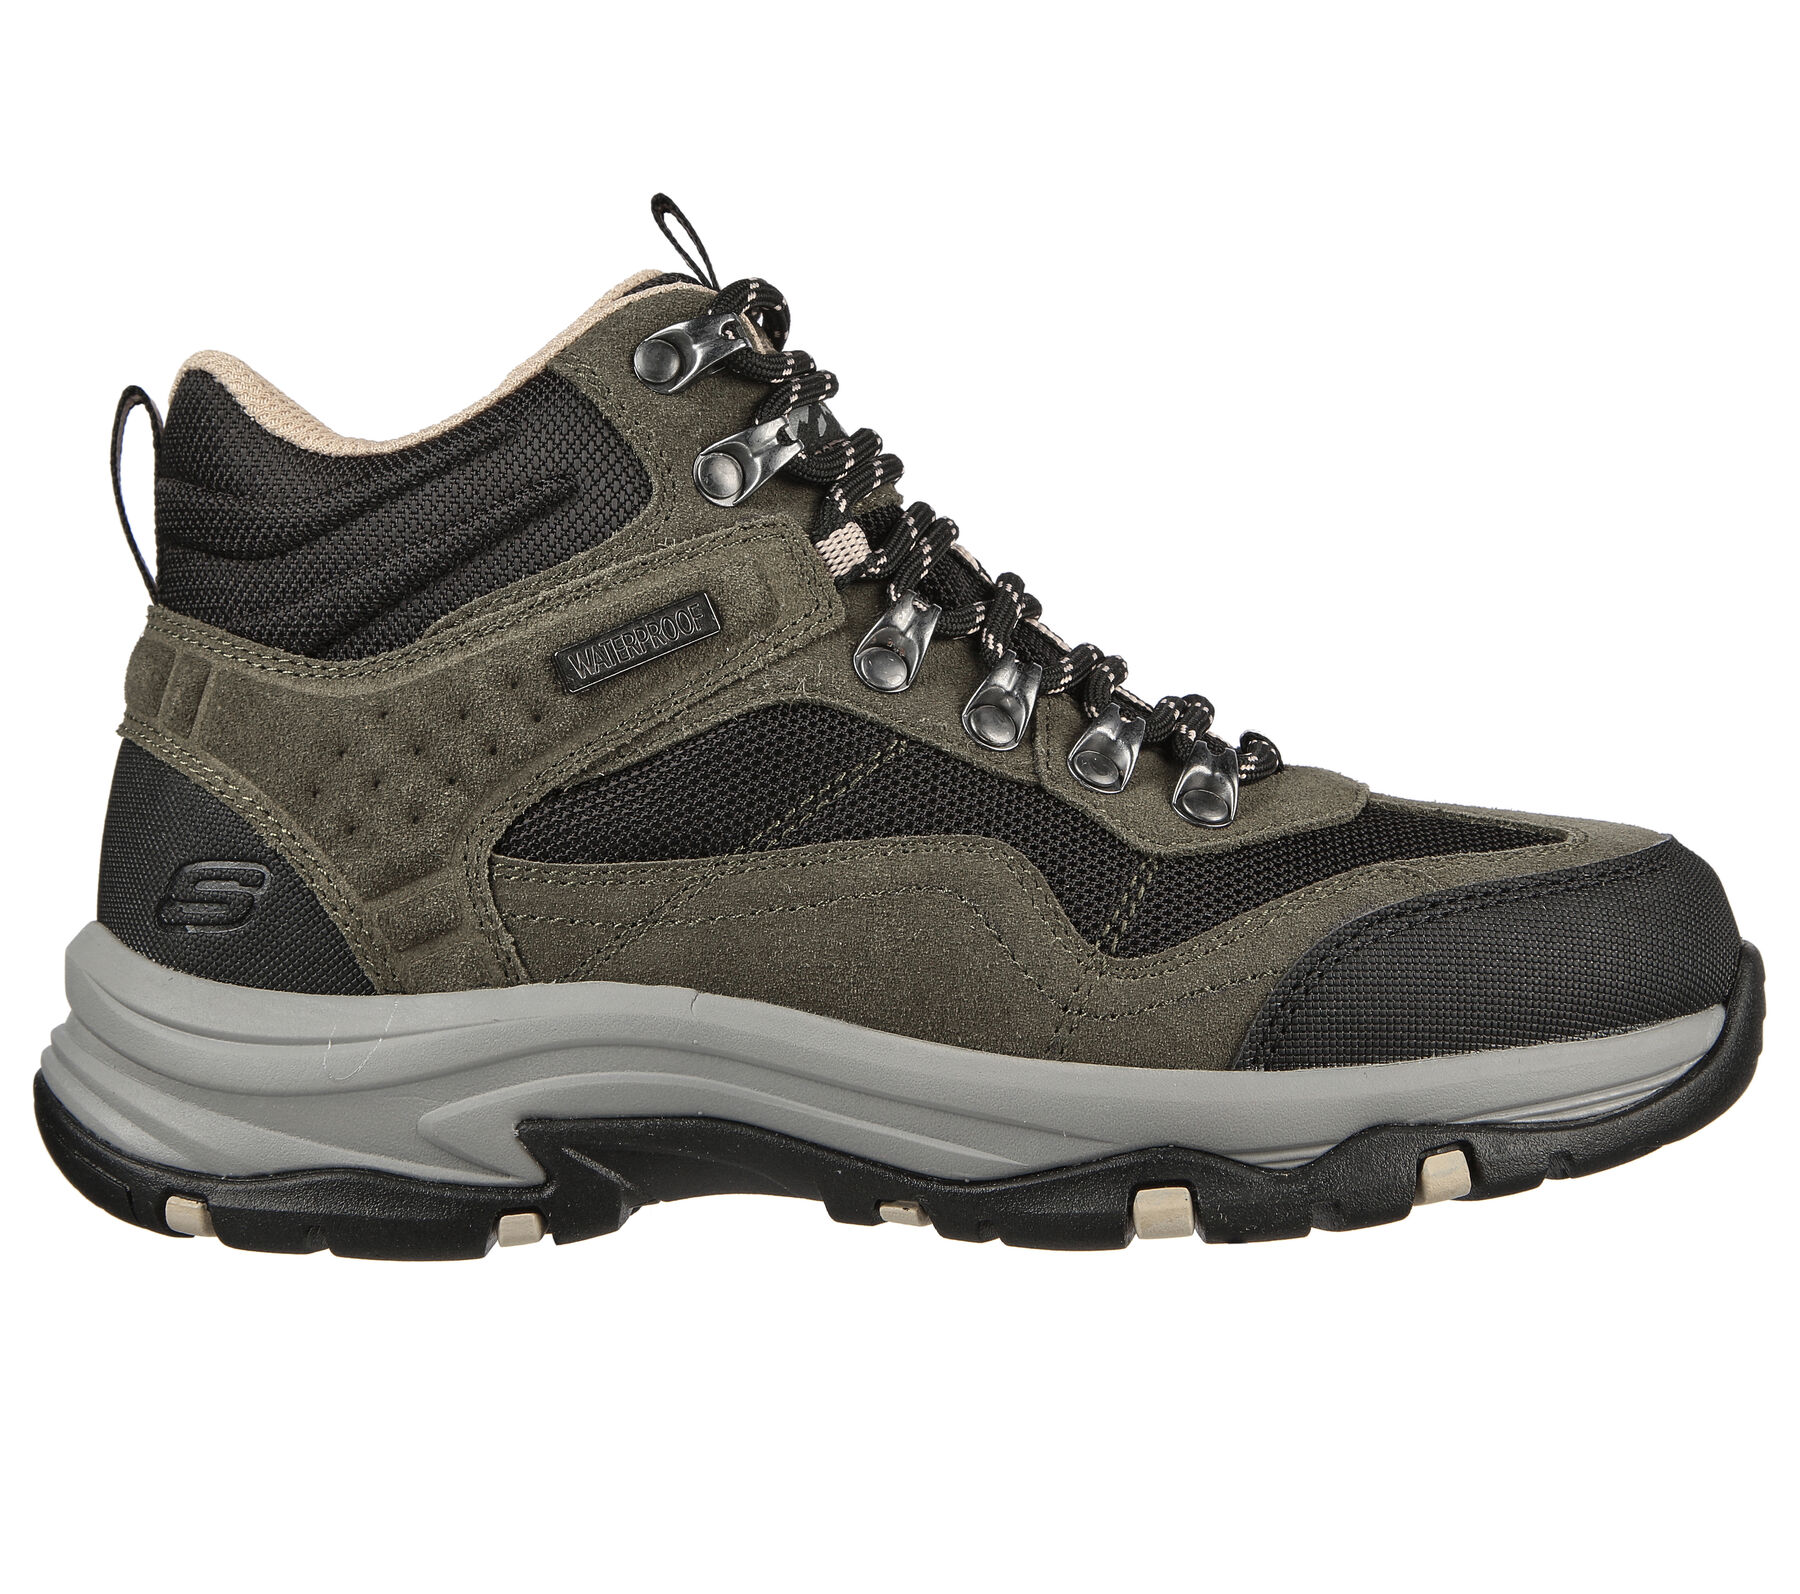 Shop the Relaxed Fit: Trego - Base Camp | SKECHERS CA